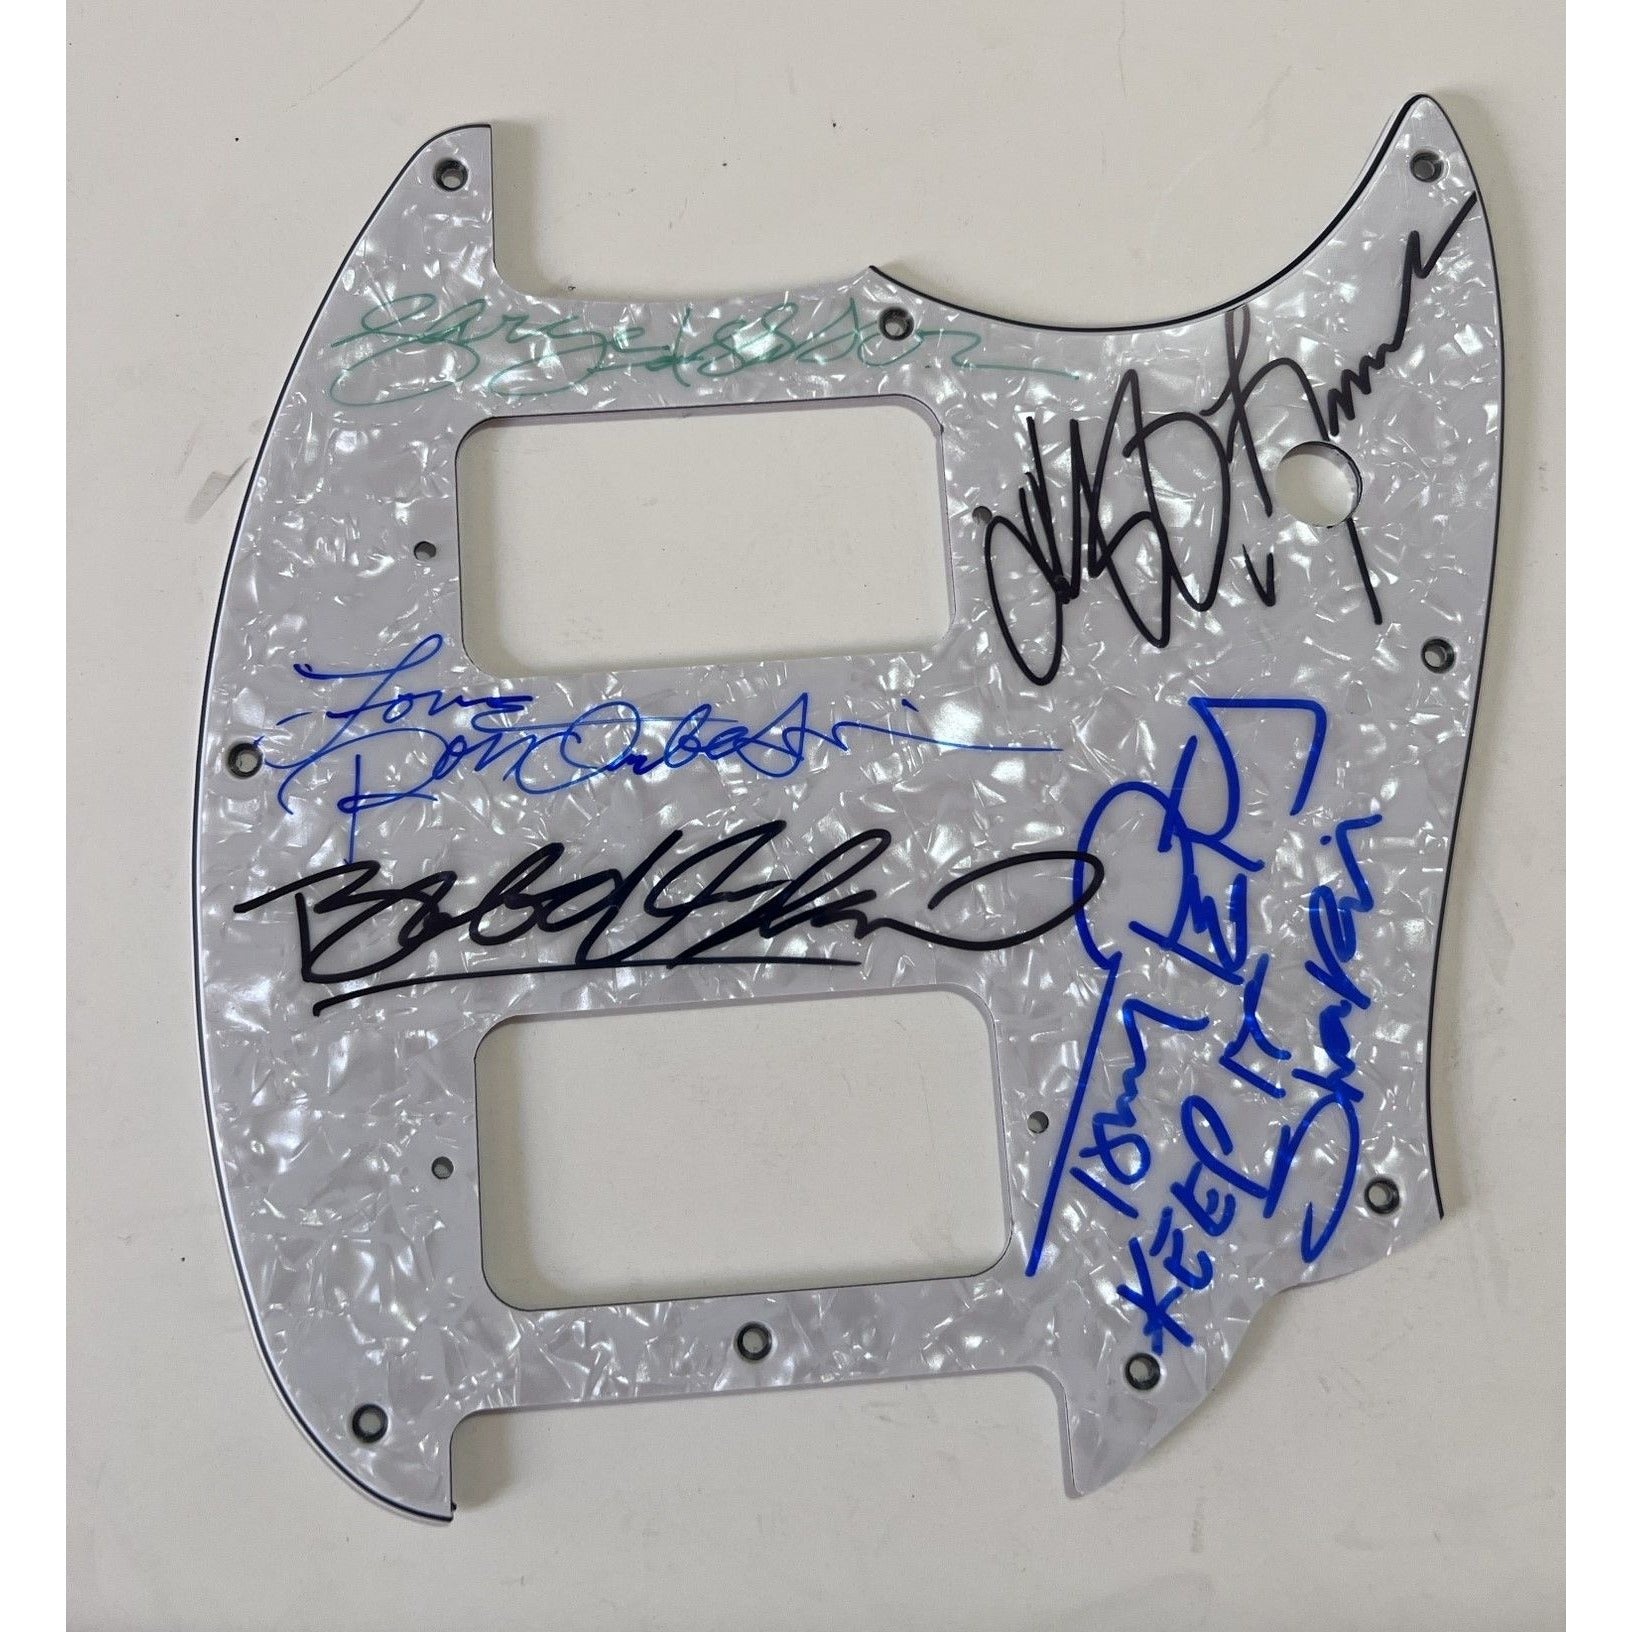 Traveling Wilbury's  Roy Orbison Bob Dylan Tom Petty Jeff Lynne George Harrison pickguard signed with proof